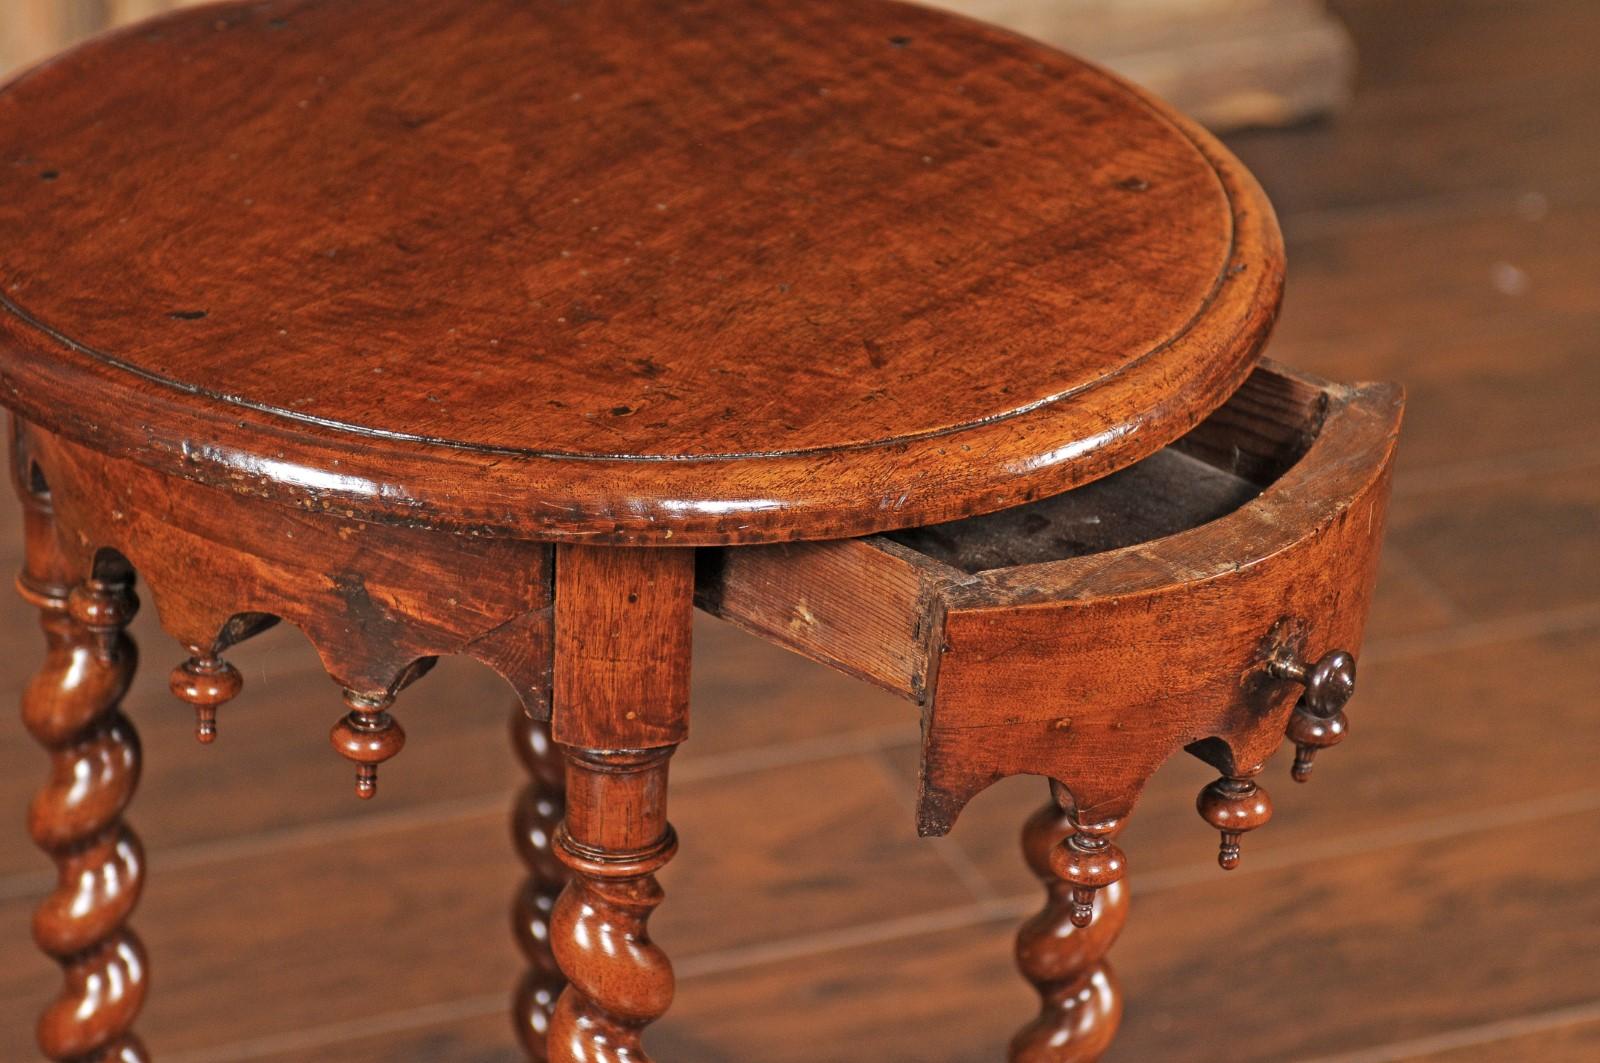 19th Century French 1870s Louis XIII Style Walnut Guéridon Side Table with Barley Twist Legs